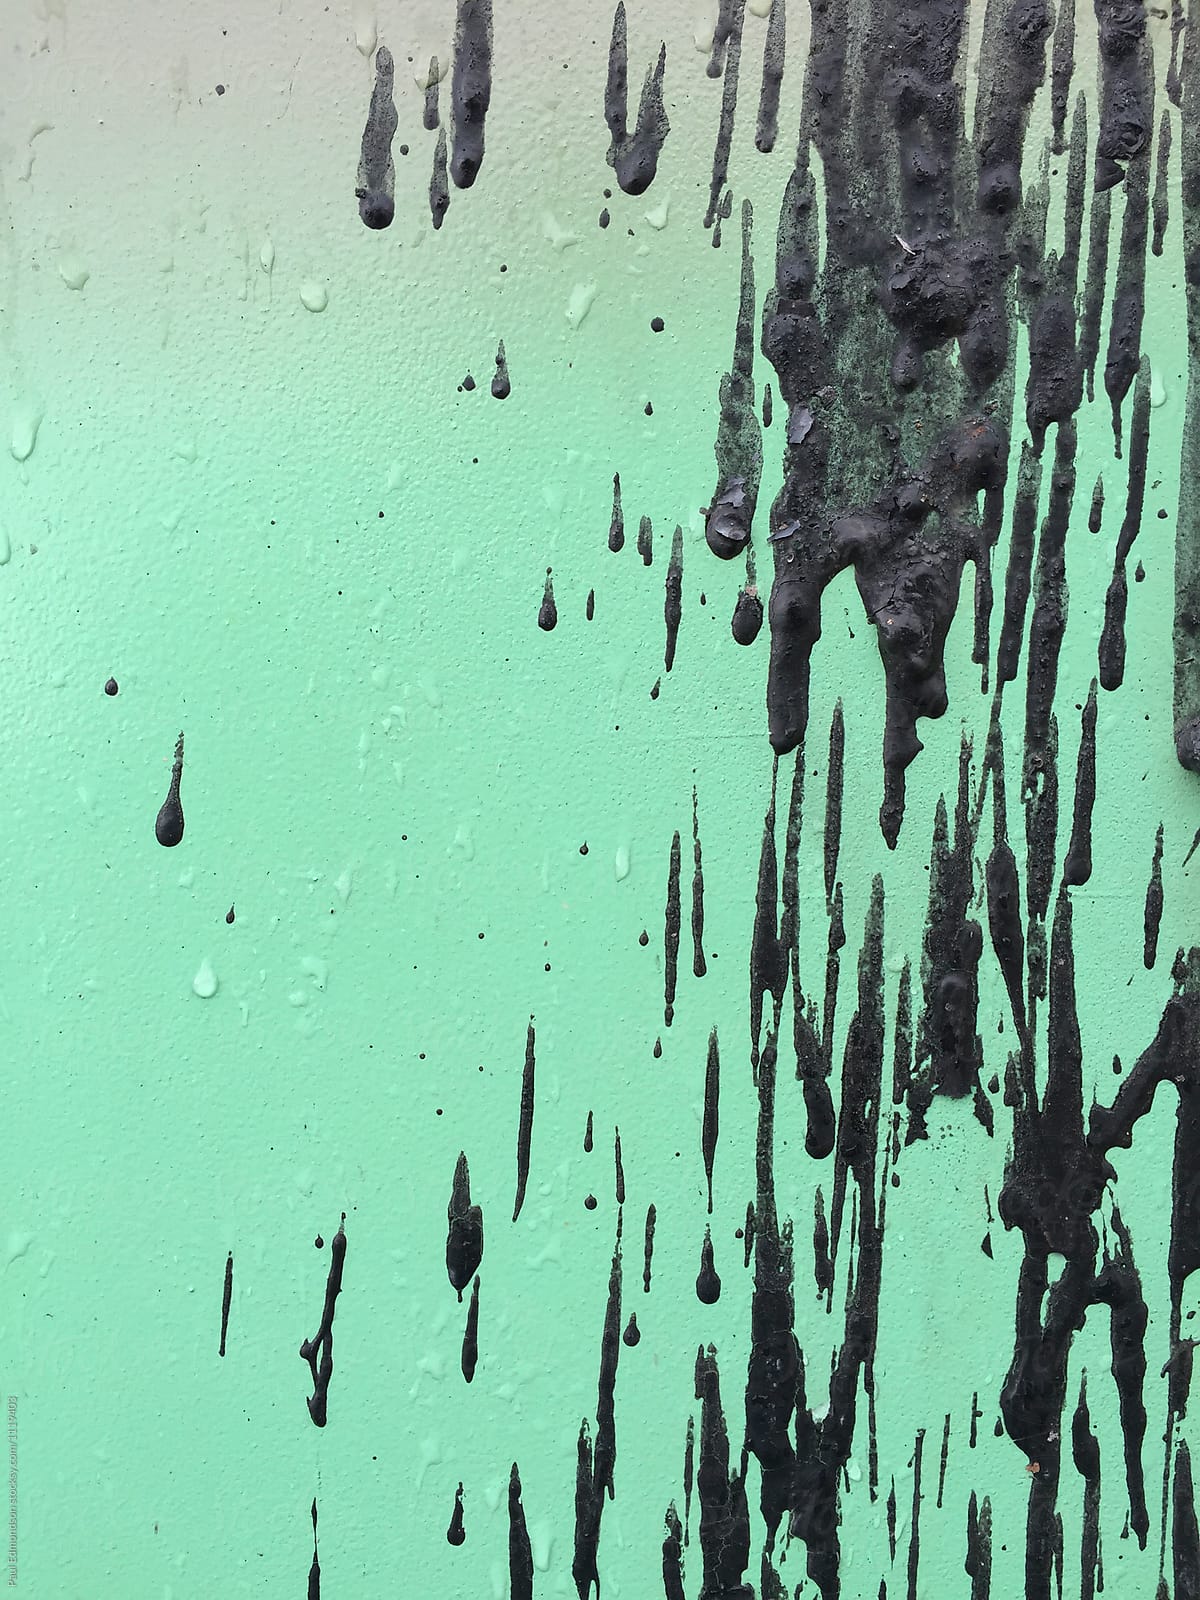 Close up of dripping black paint on metal trash container